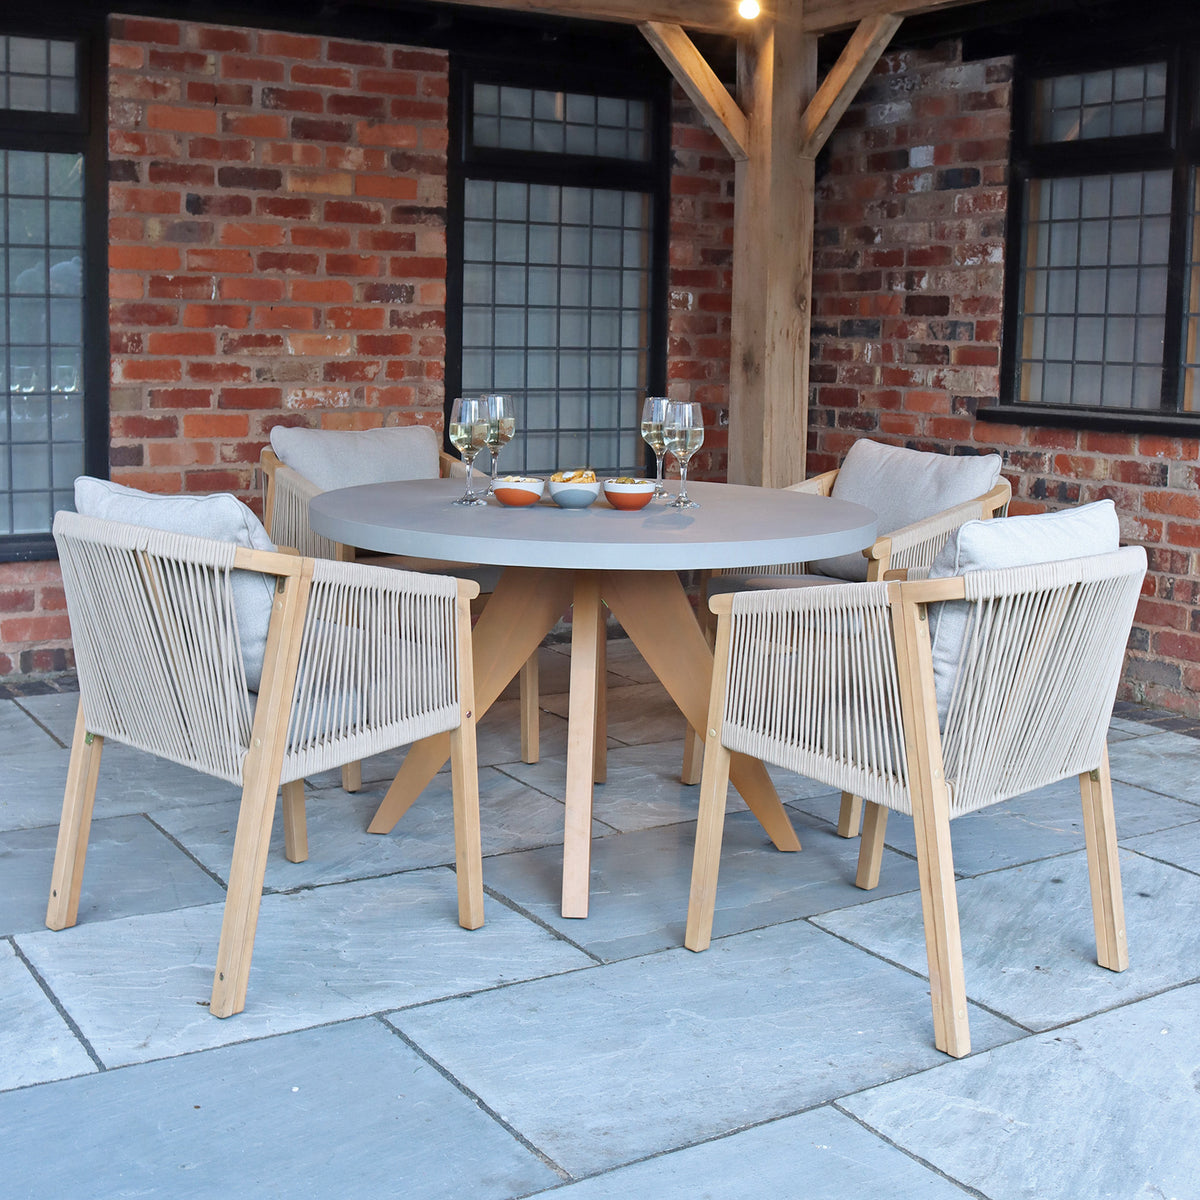 Luna 120cm Round Concrete Table Set with 4 Dining Chairs from Roseland Furniture